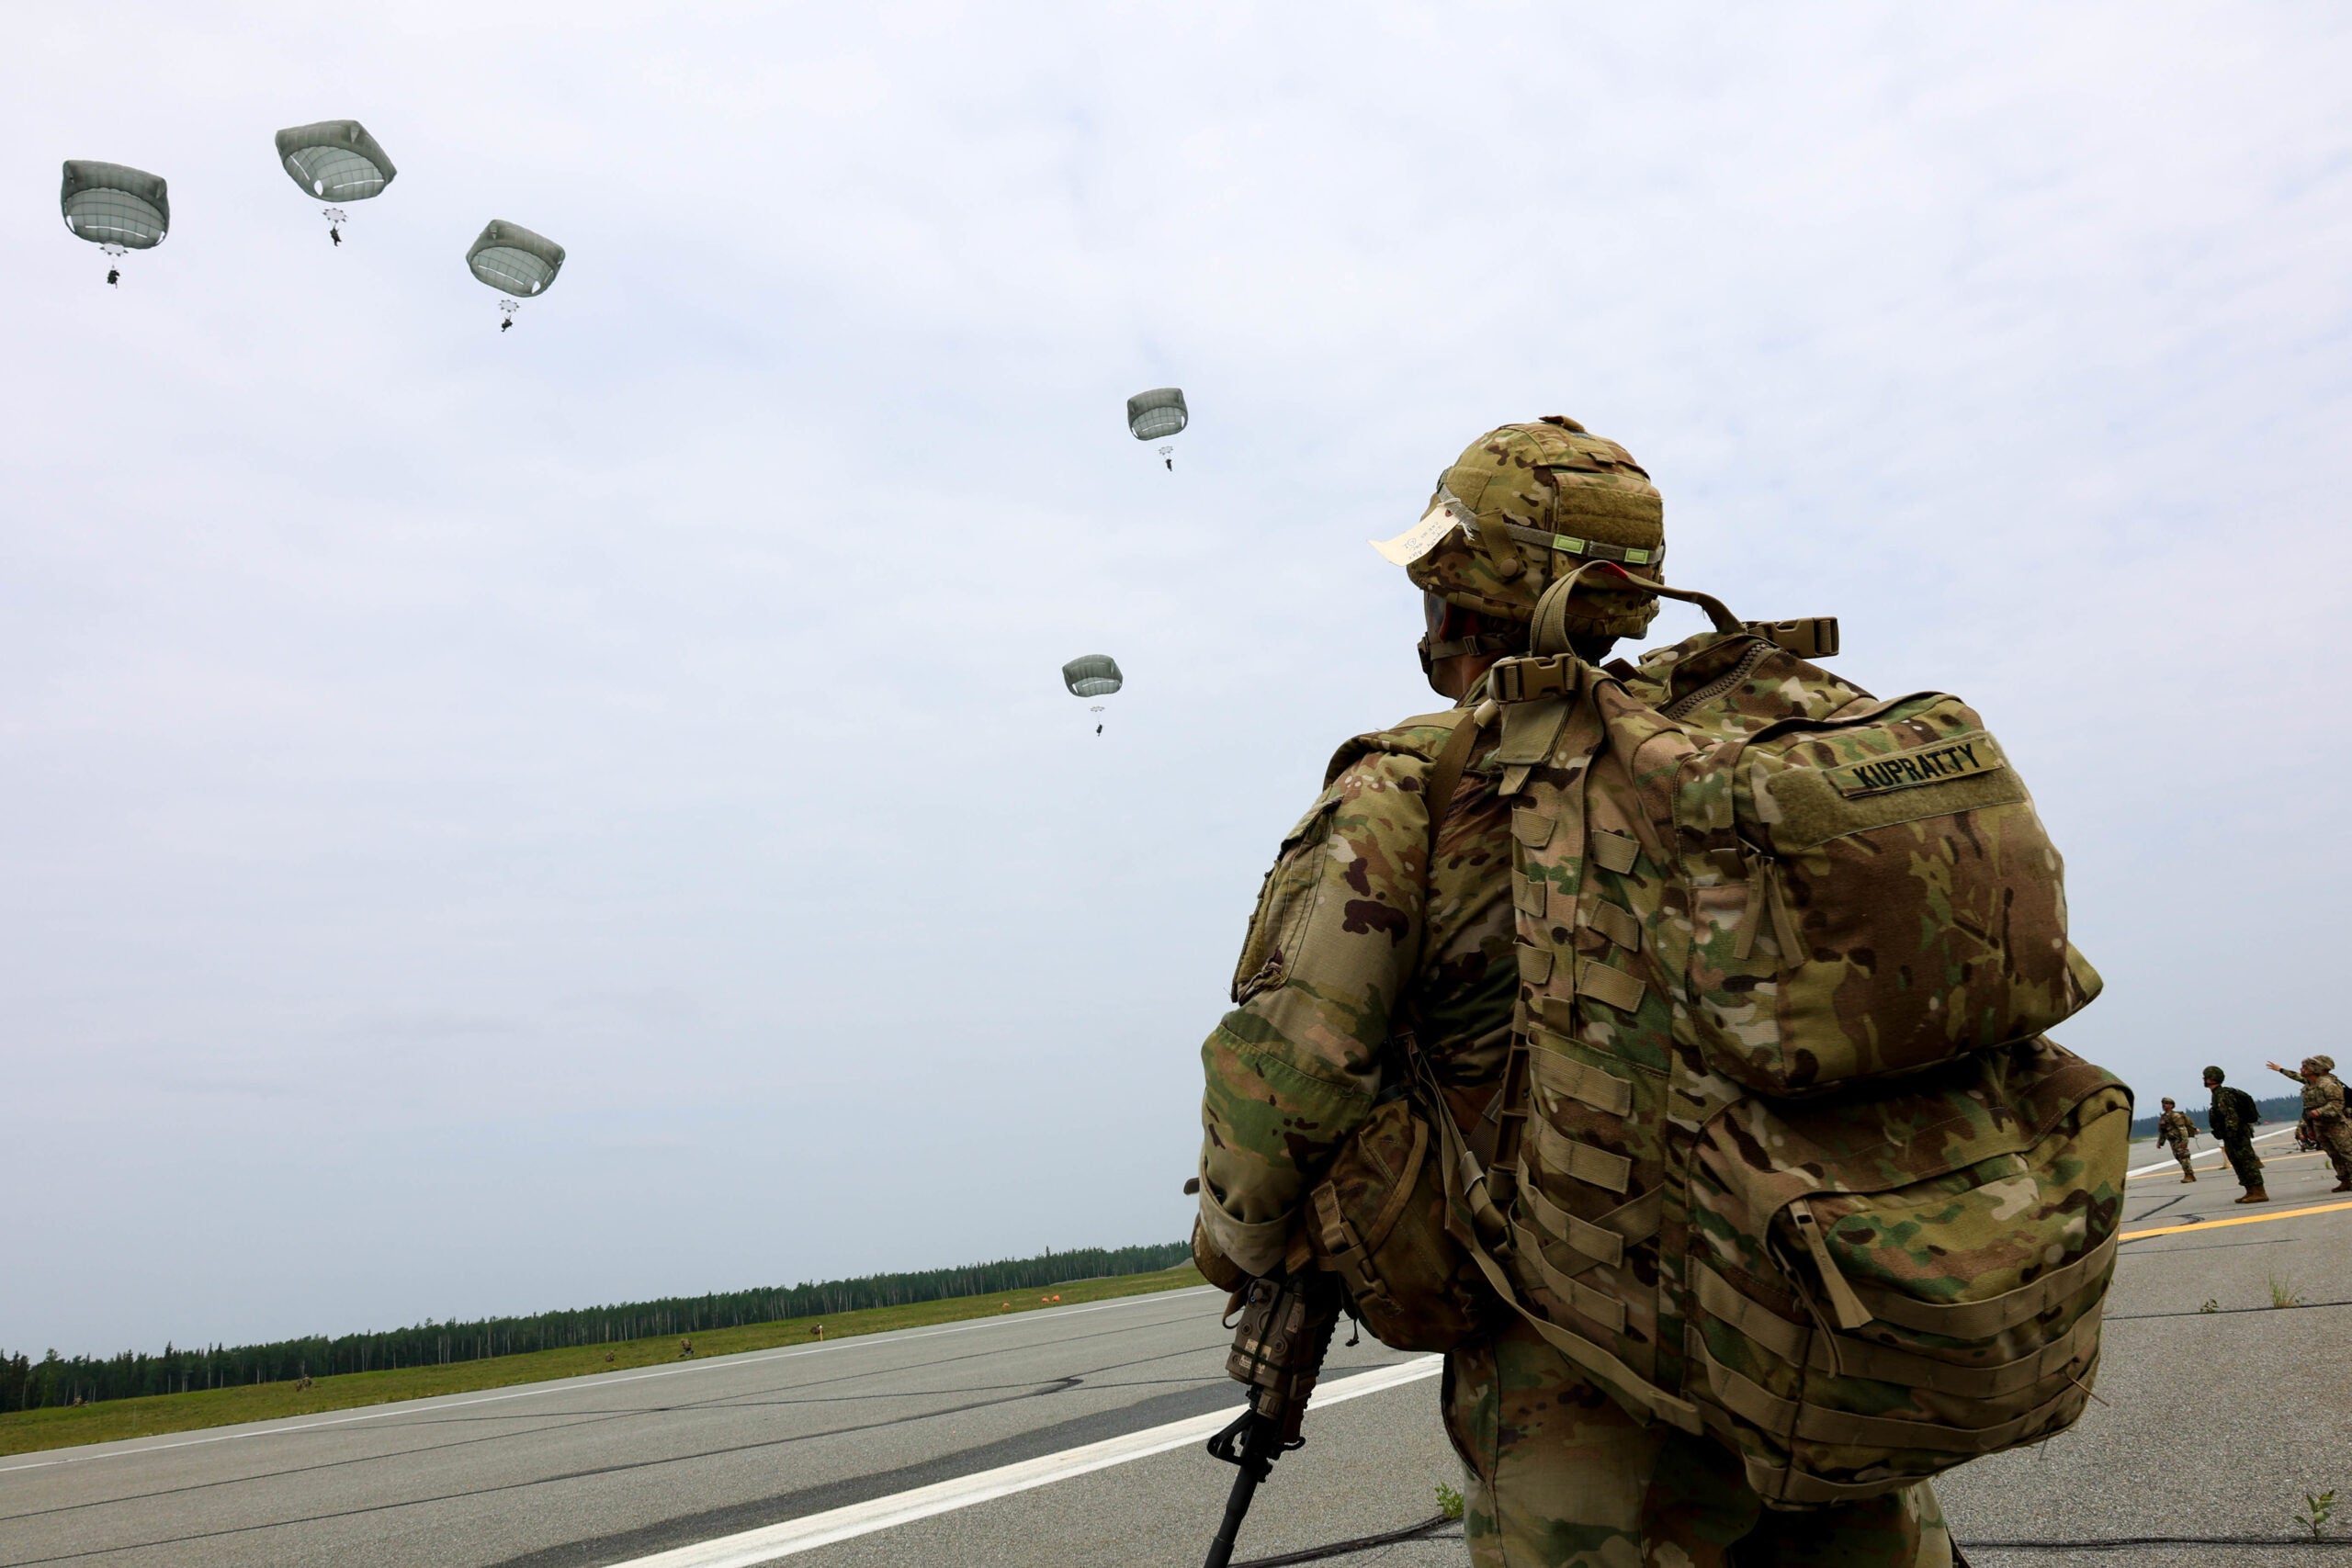 U.S. Army Command Sgt. Maj. Alex Kupratty, senior enlisted advisor for 2nd Infantry Brigade Combat Team (Airborne), 11th Airborne Division, observes Paratroopers assigned to 3rd Battalion, 509th Parachute Infantry Regiment, seize an airfield during RED FLAG-Alaska 22-2 over Allen Army Airfield, Fort Greely, Alaska, June 15, 2022. The exercise provides unique opportunities to integrate various forces into joint, coalition and multilateral training from simulated forward operating bases.